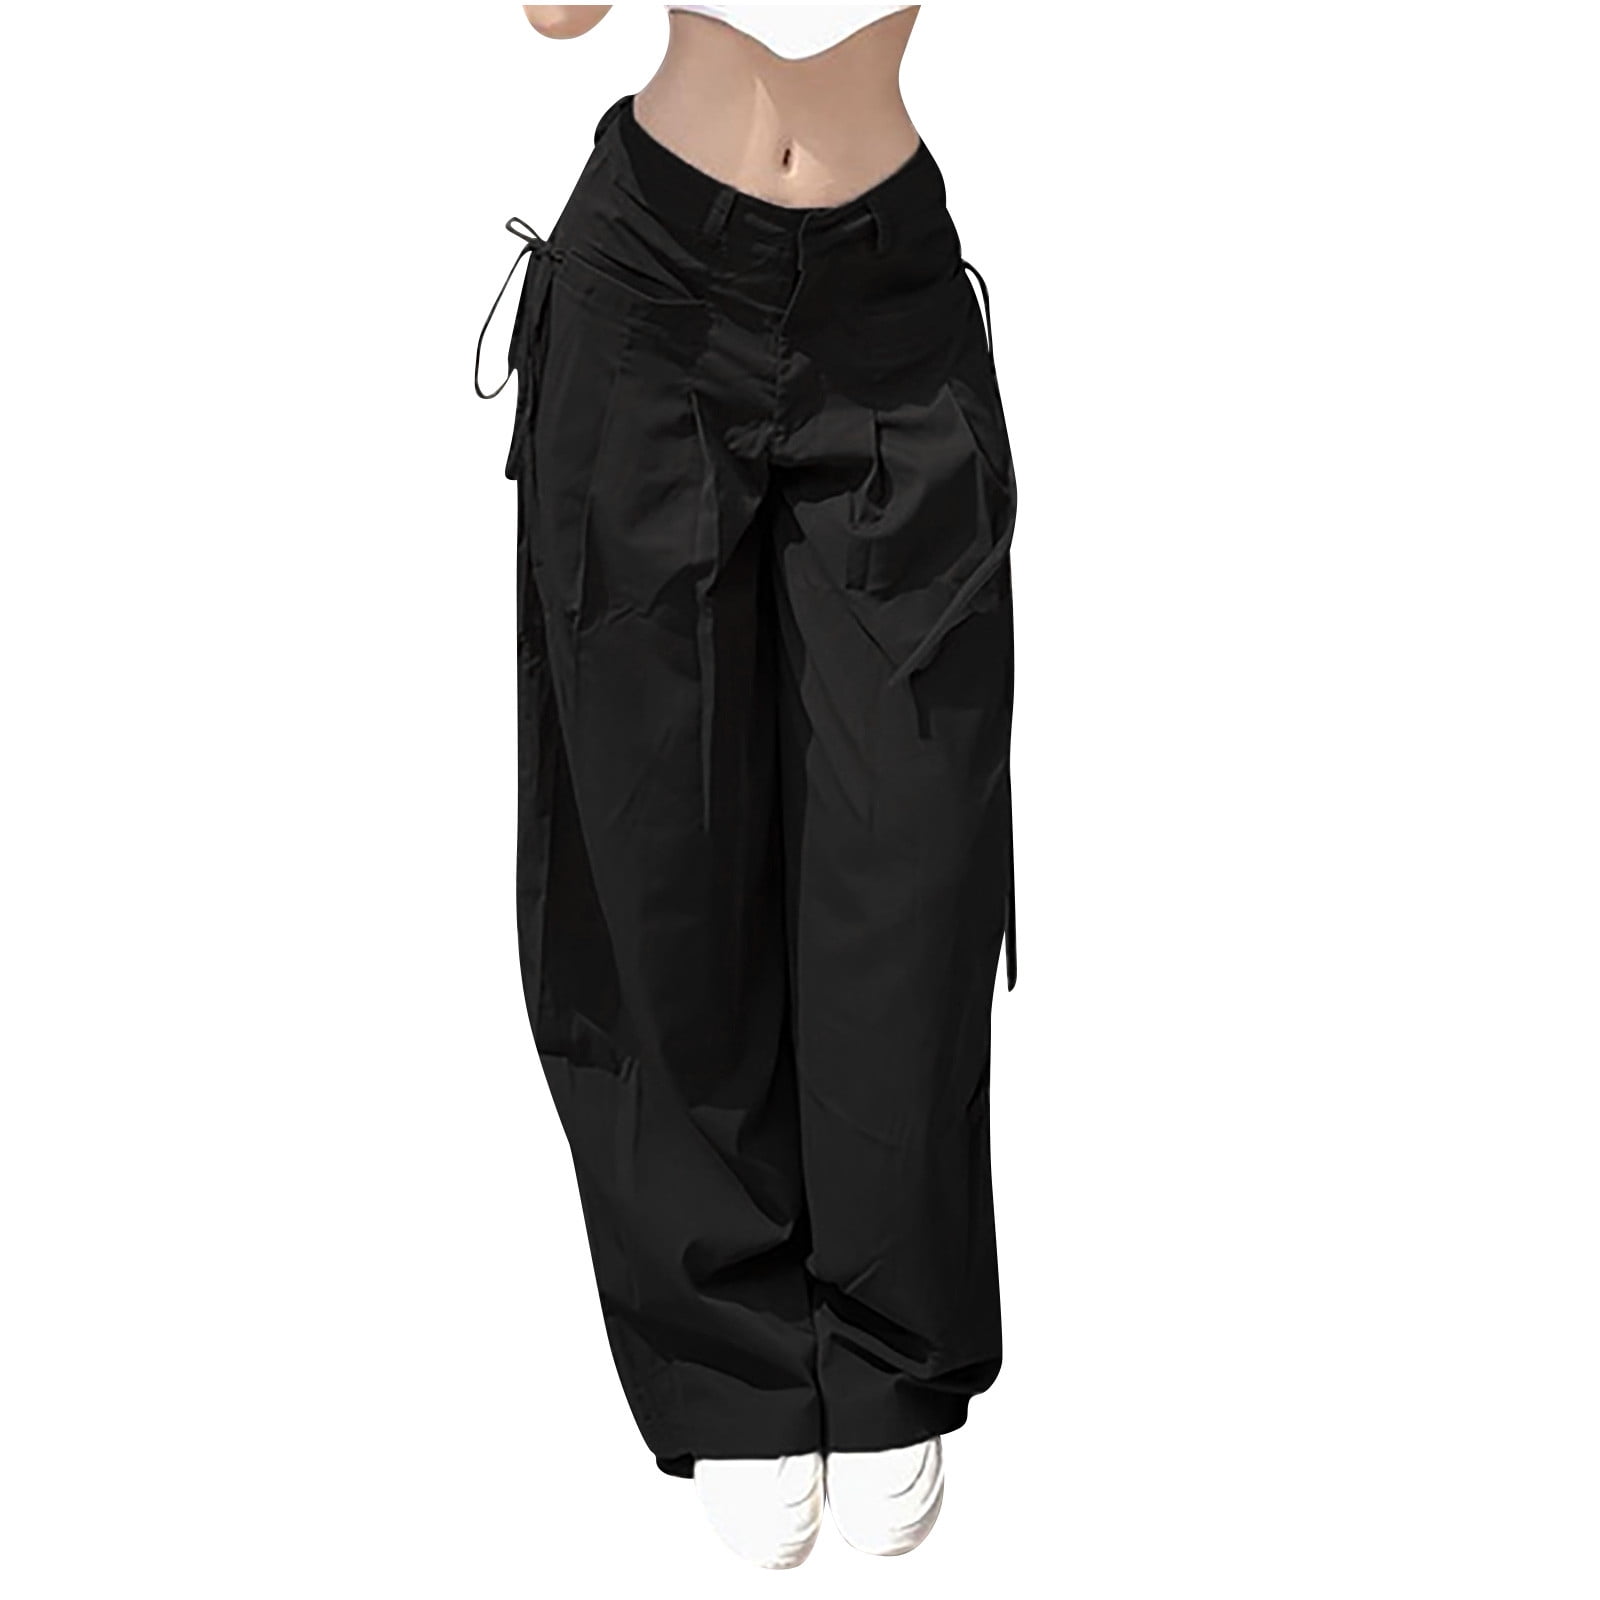 Mens Casual Hip-Hop Overalls Reflective Tooling Pants Cargo Trousers  Sweatpants | eBay